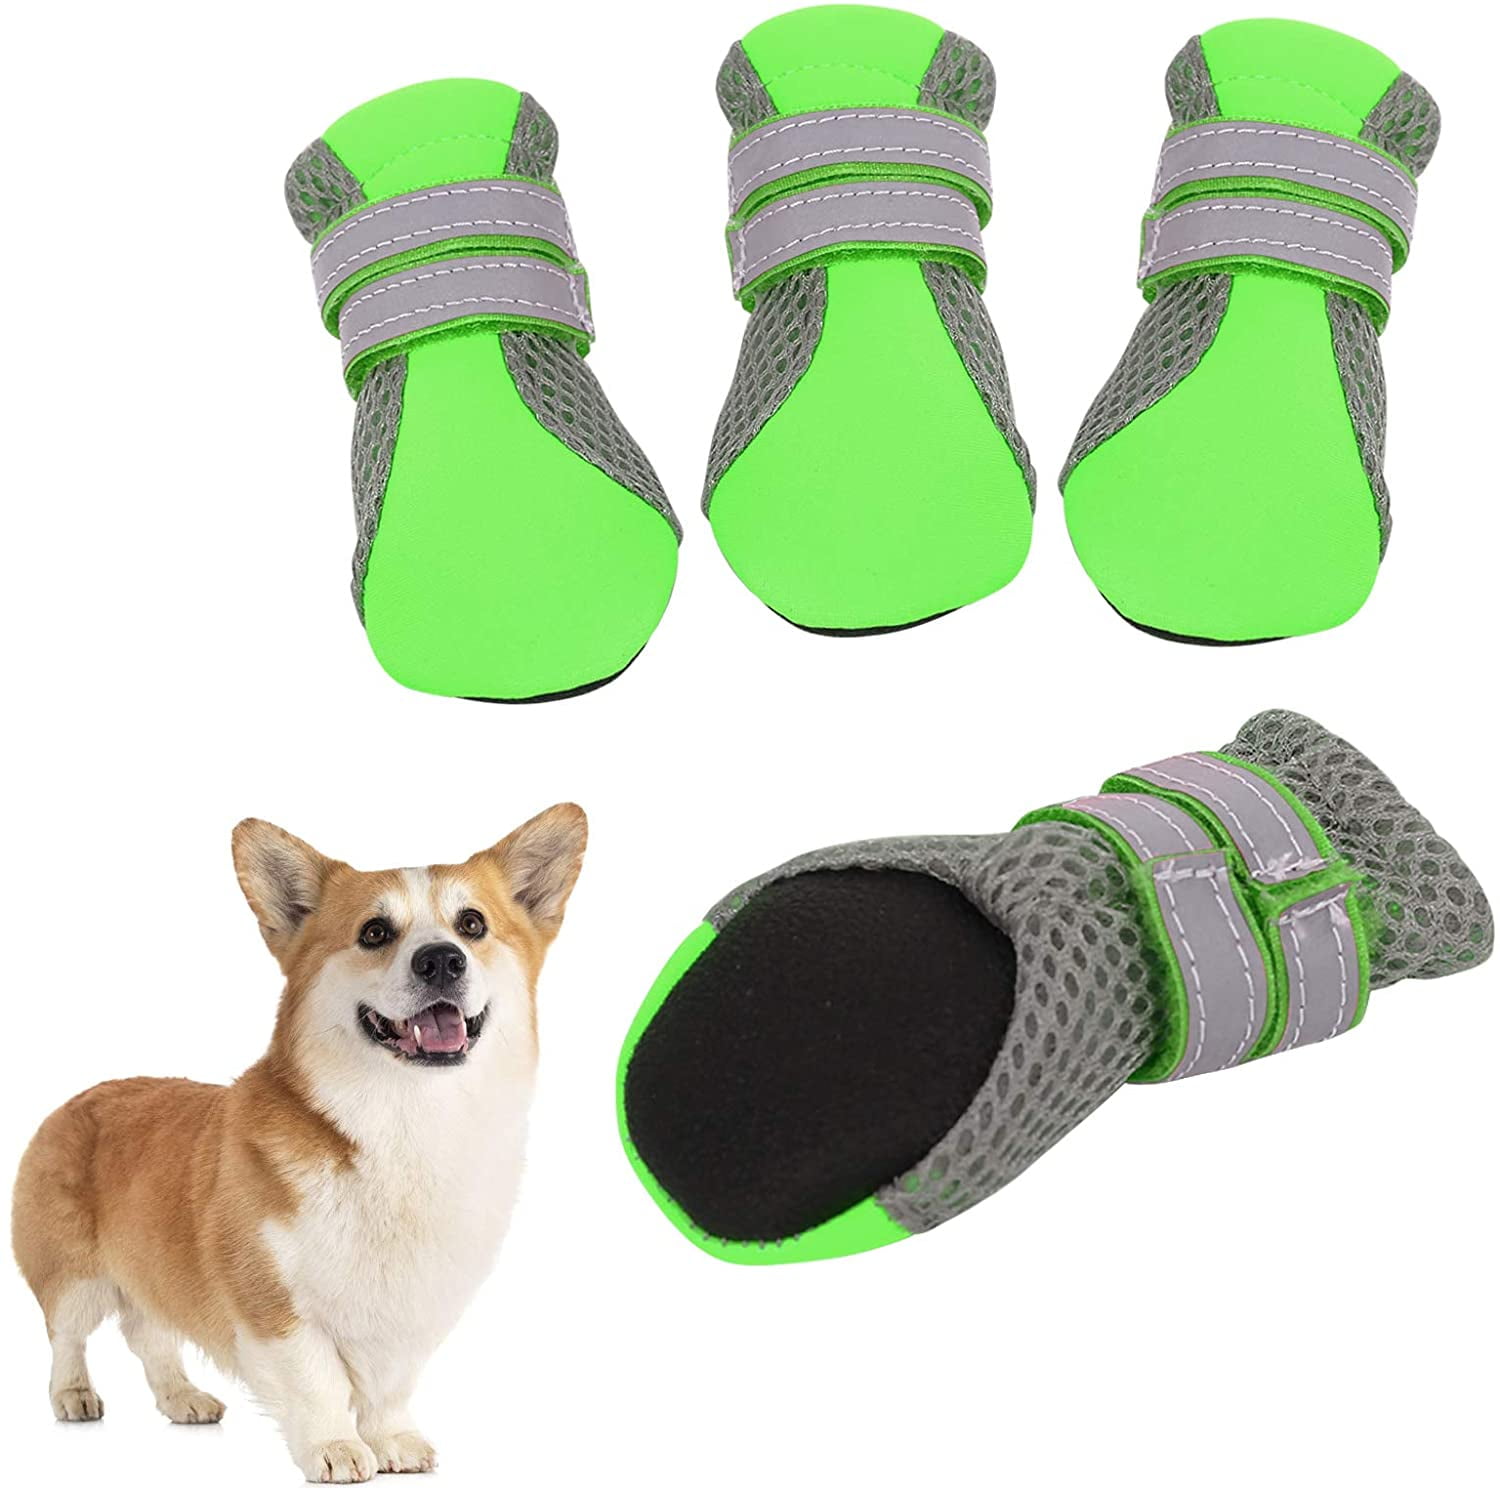 4 Pcs Fashionable Waterproof Non-Slip Breathable Dog Shoes Soft Comfortable Pet Boots Puppies Outdoor Shoes with Reflective Straps for Walking Hiking Camping 4# Black Pet Shoes